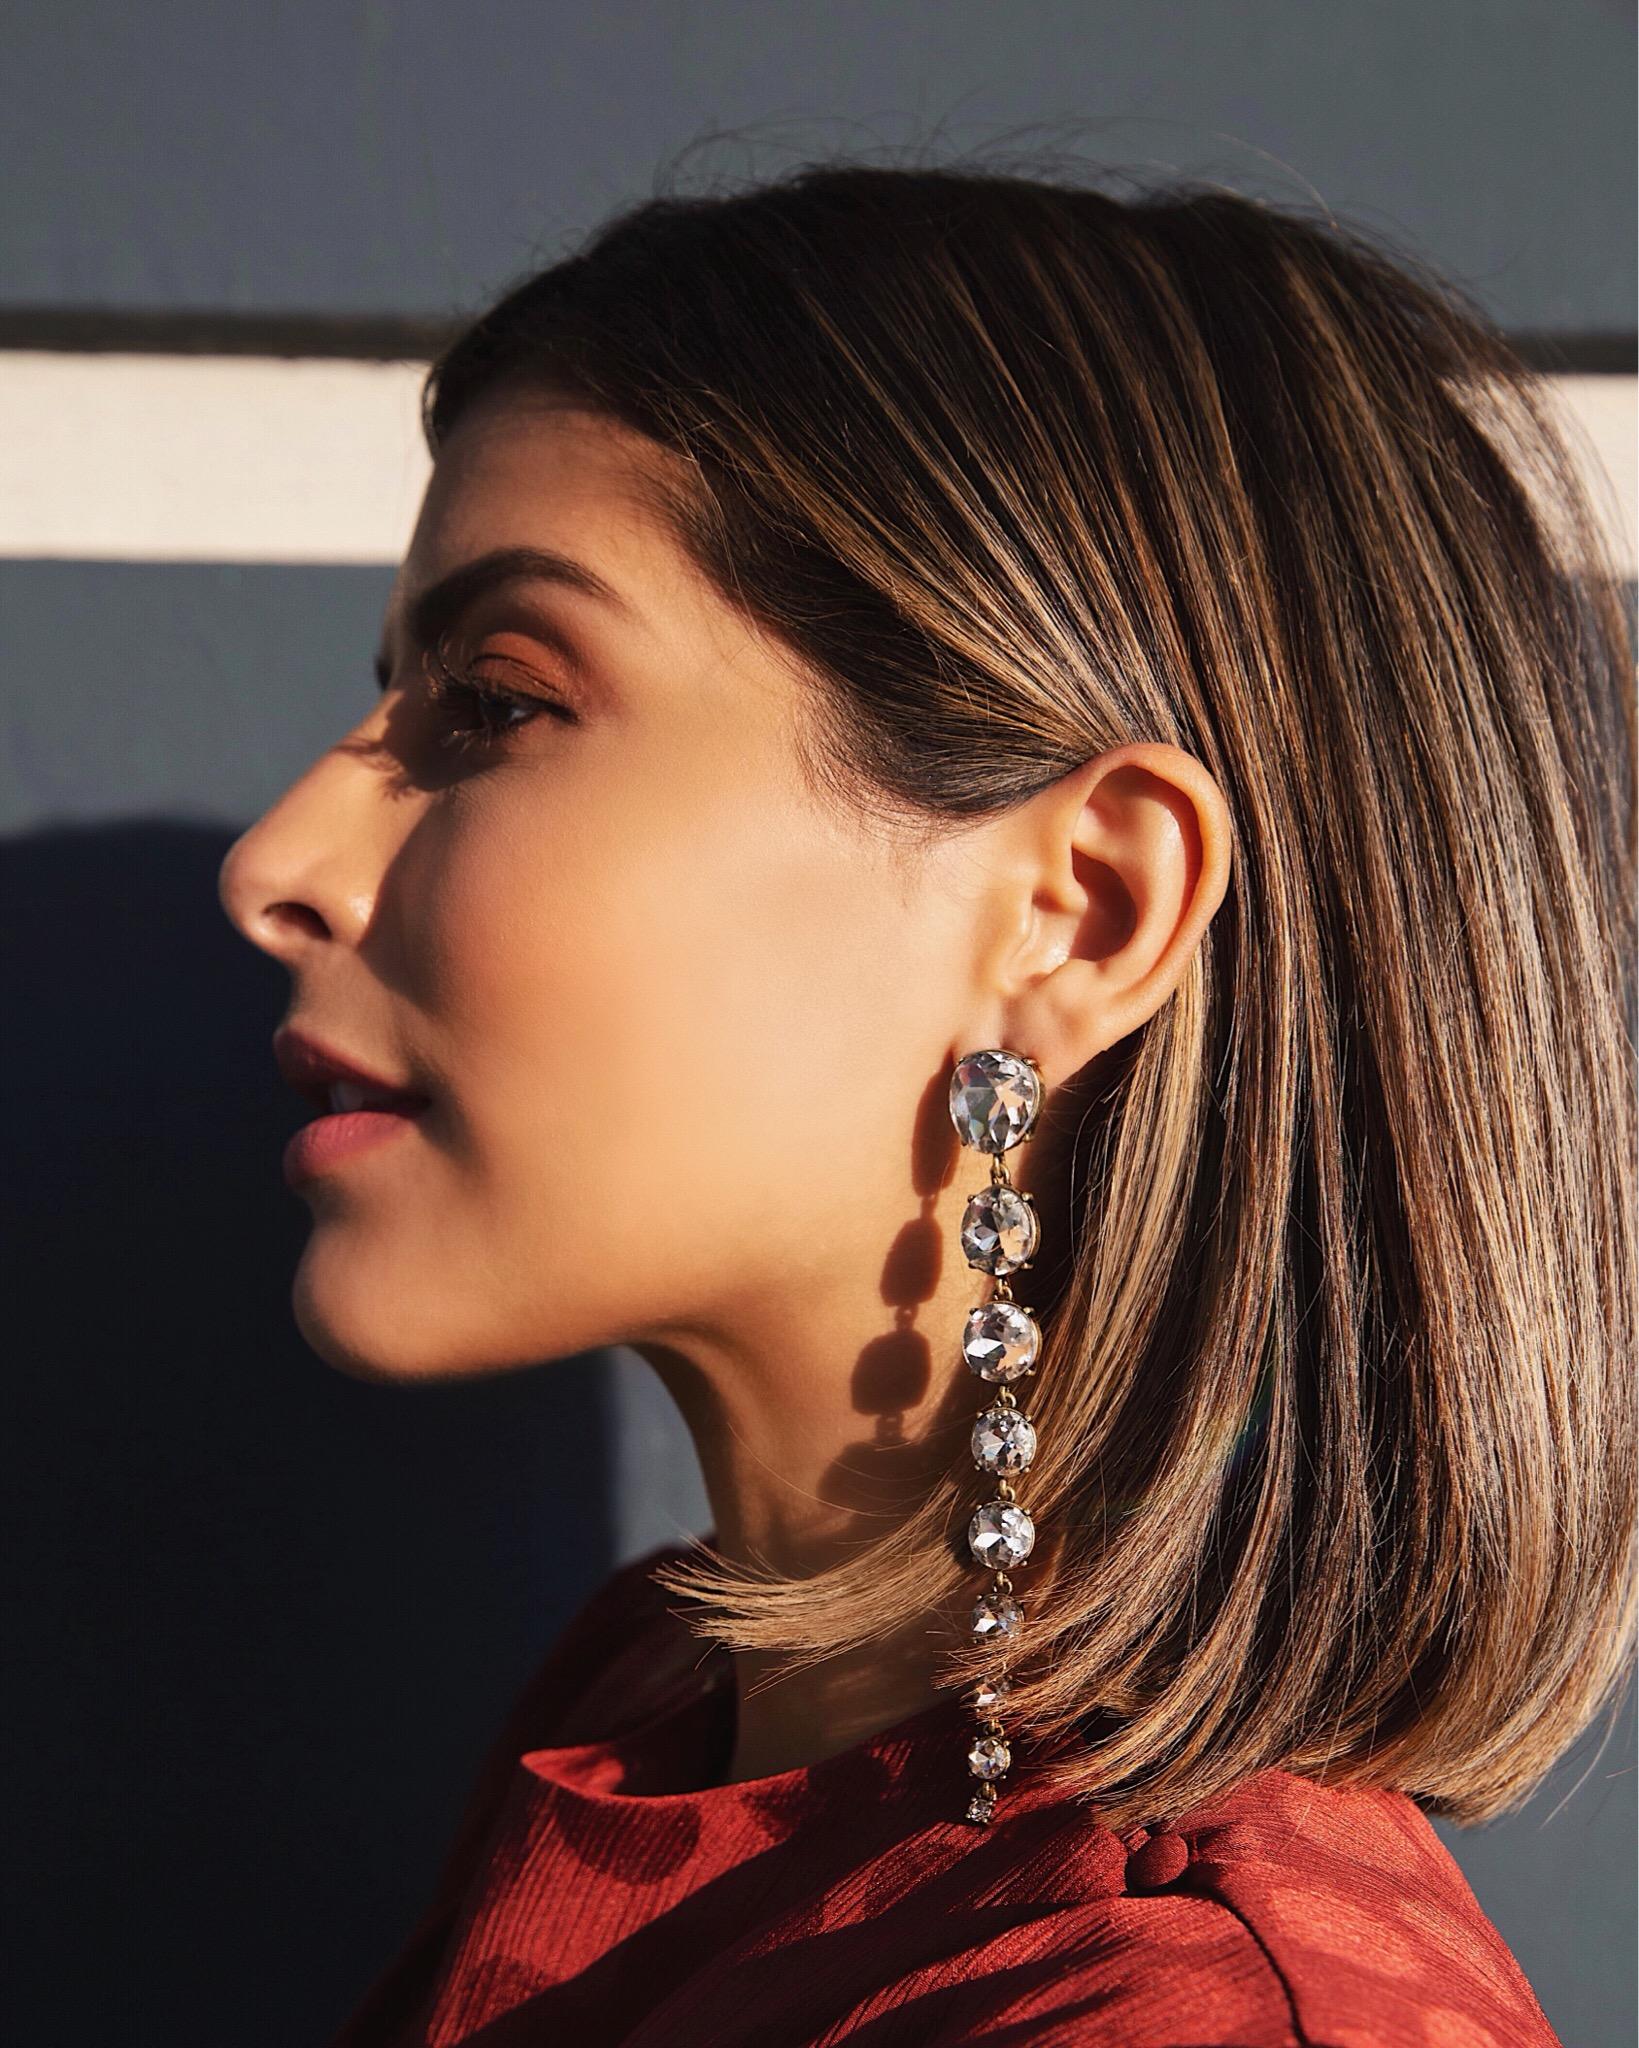 Statement Earrings for the holidays at every budget by Pam Hetlinger | TheGirlFromPanama.com | Drop earrings